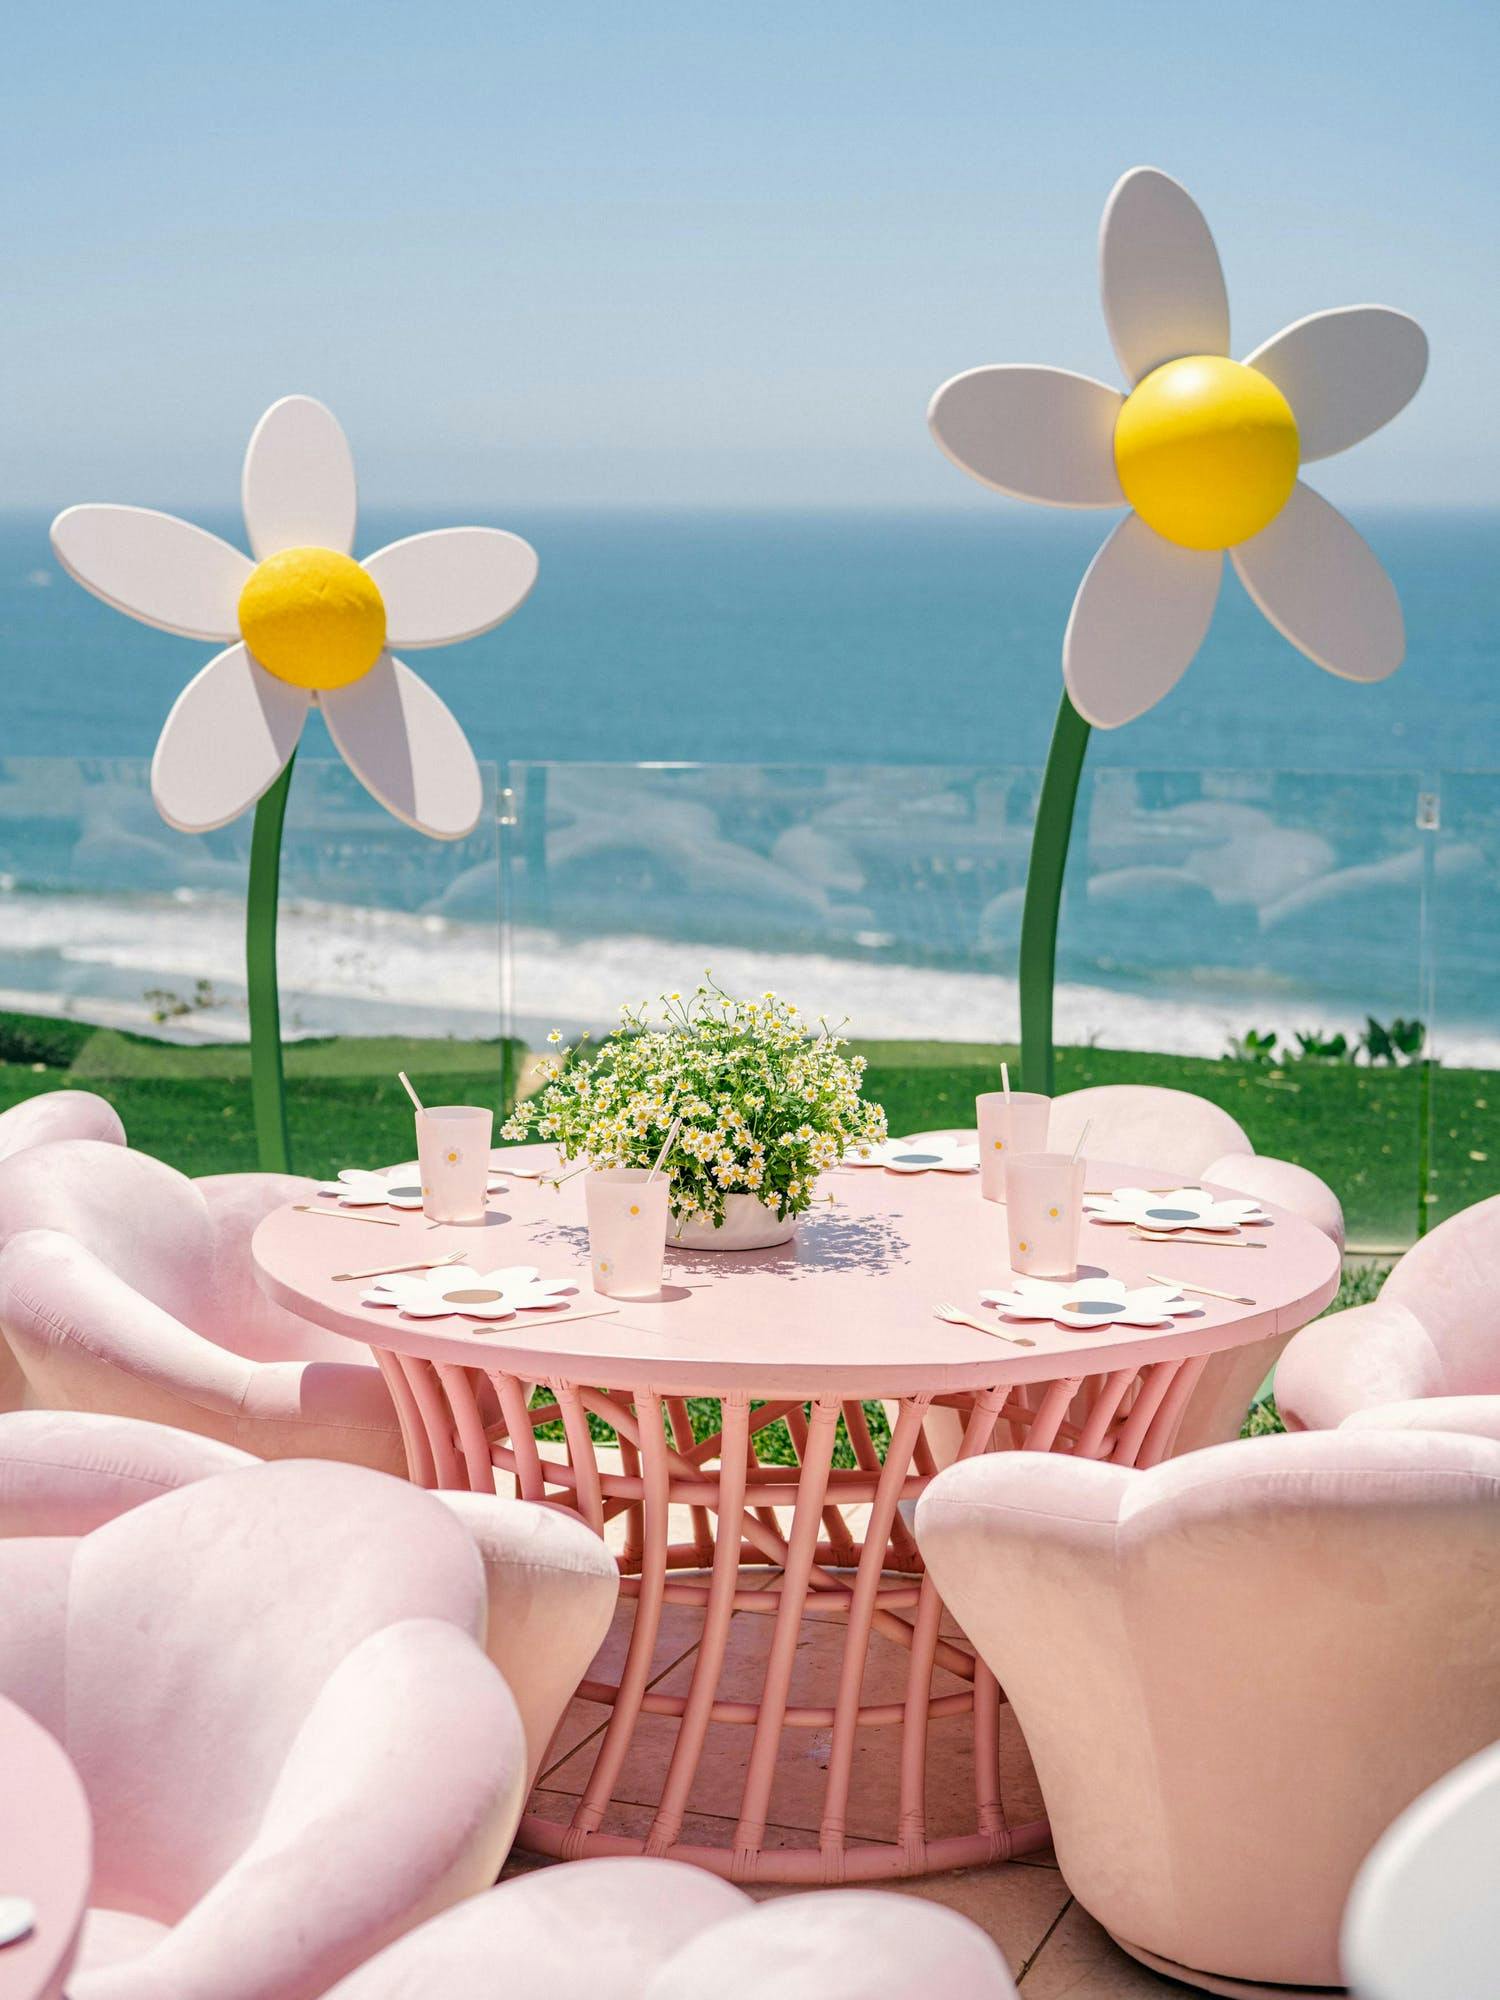 Daisy Themed Birthday Party With Pink Tables and Seating and Daisy Décor | PartySlate